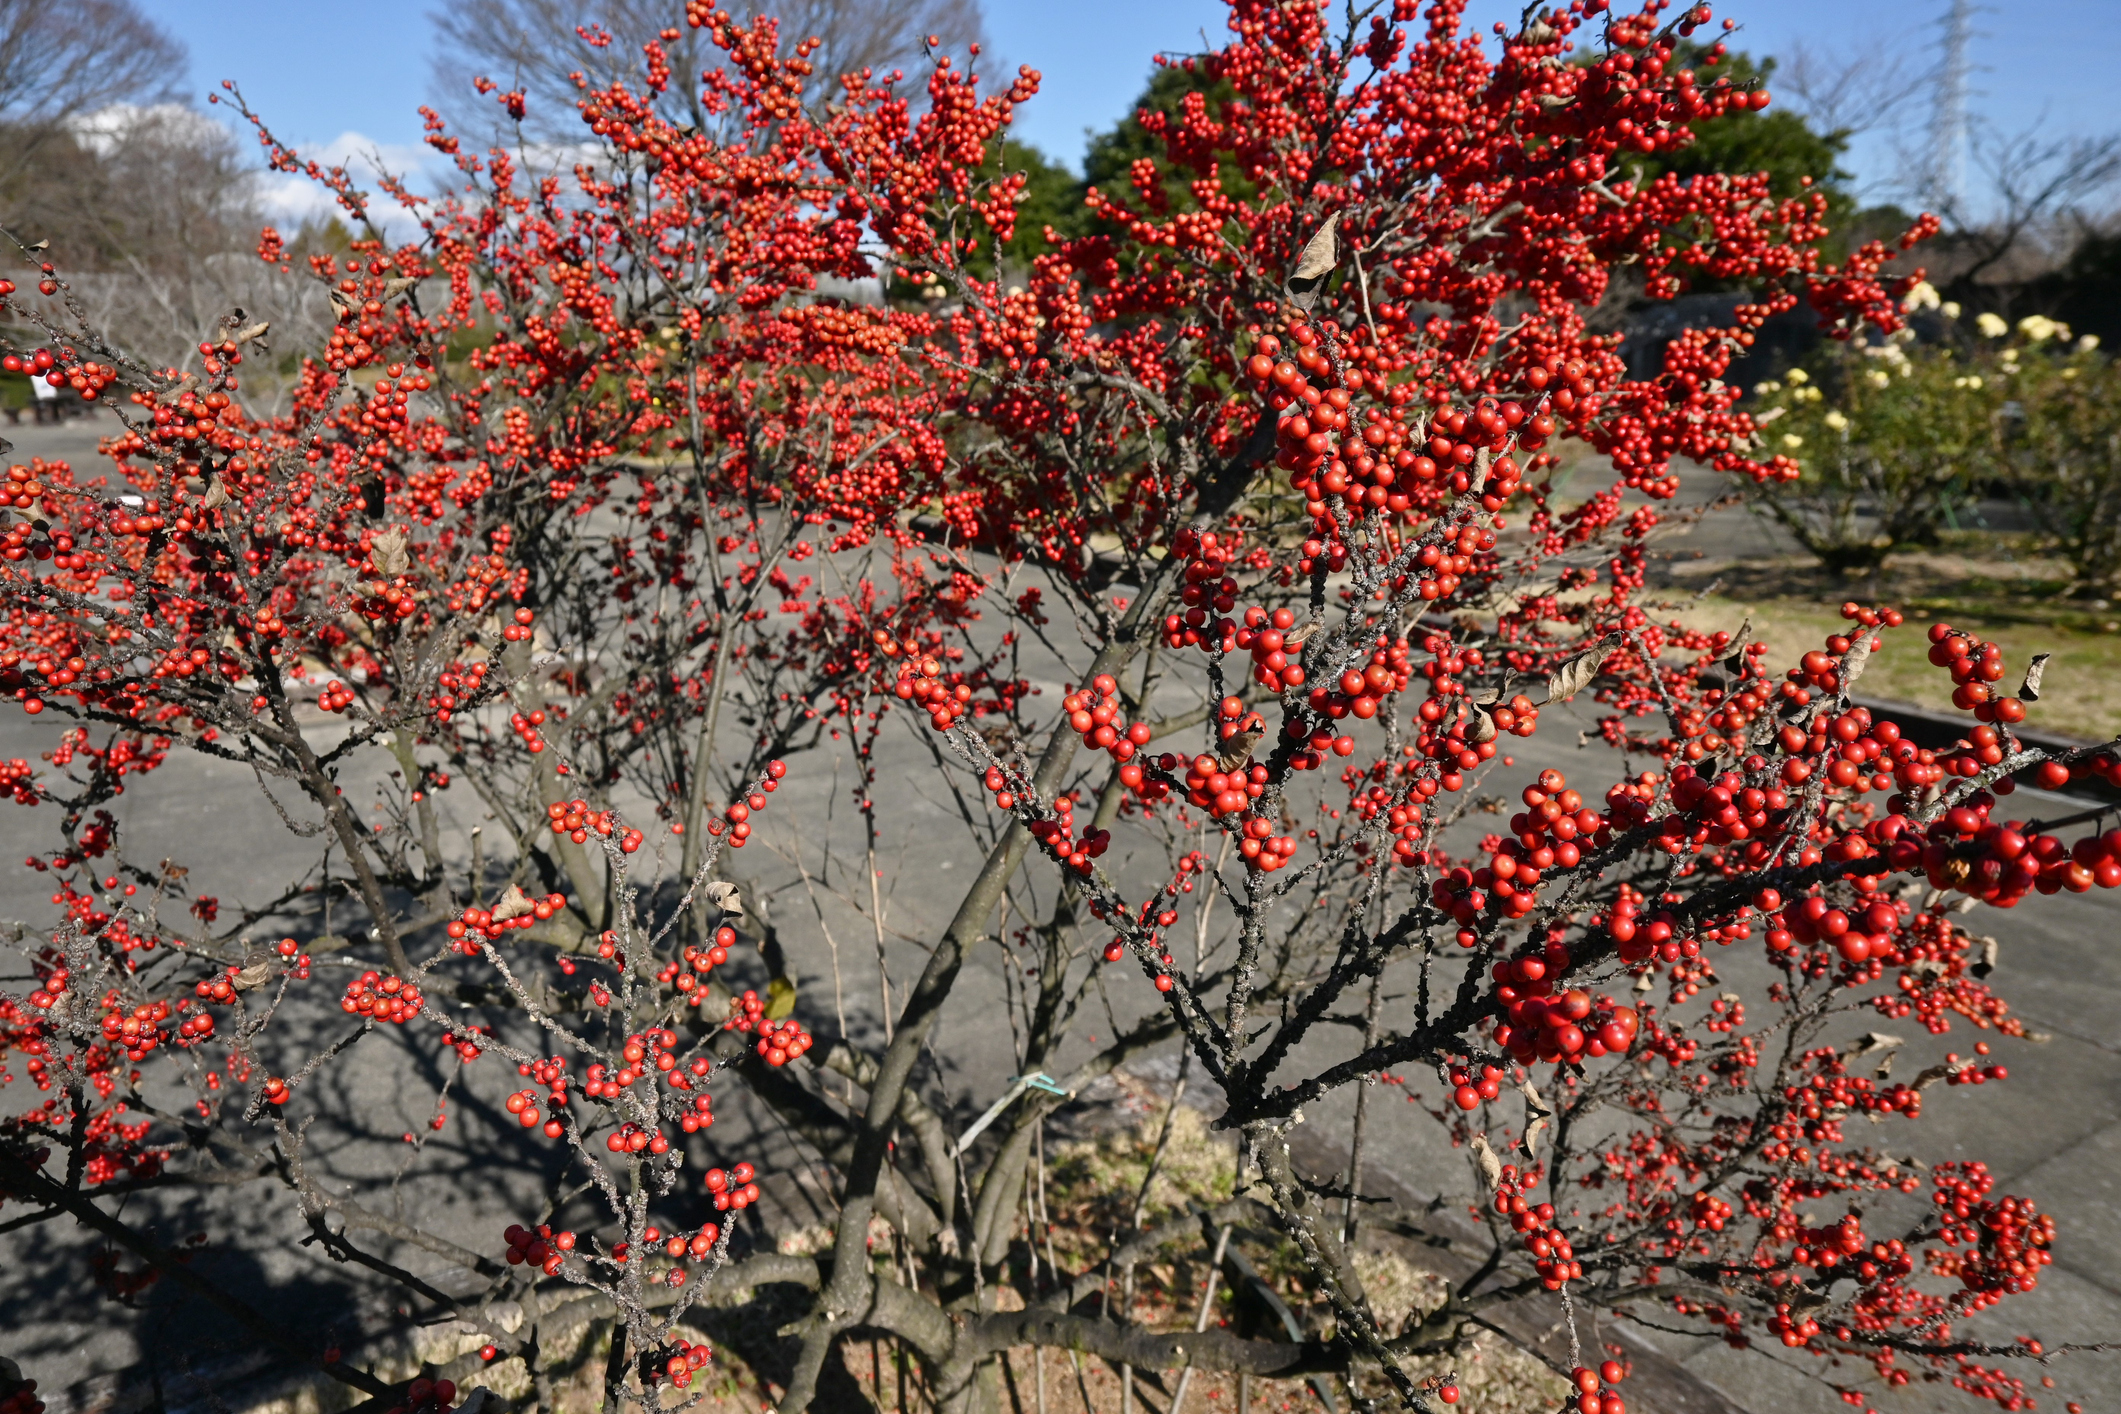 Winterberry performs well in sun or part shade and provides food for animals in late winter. 